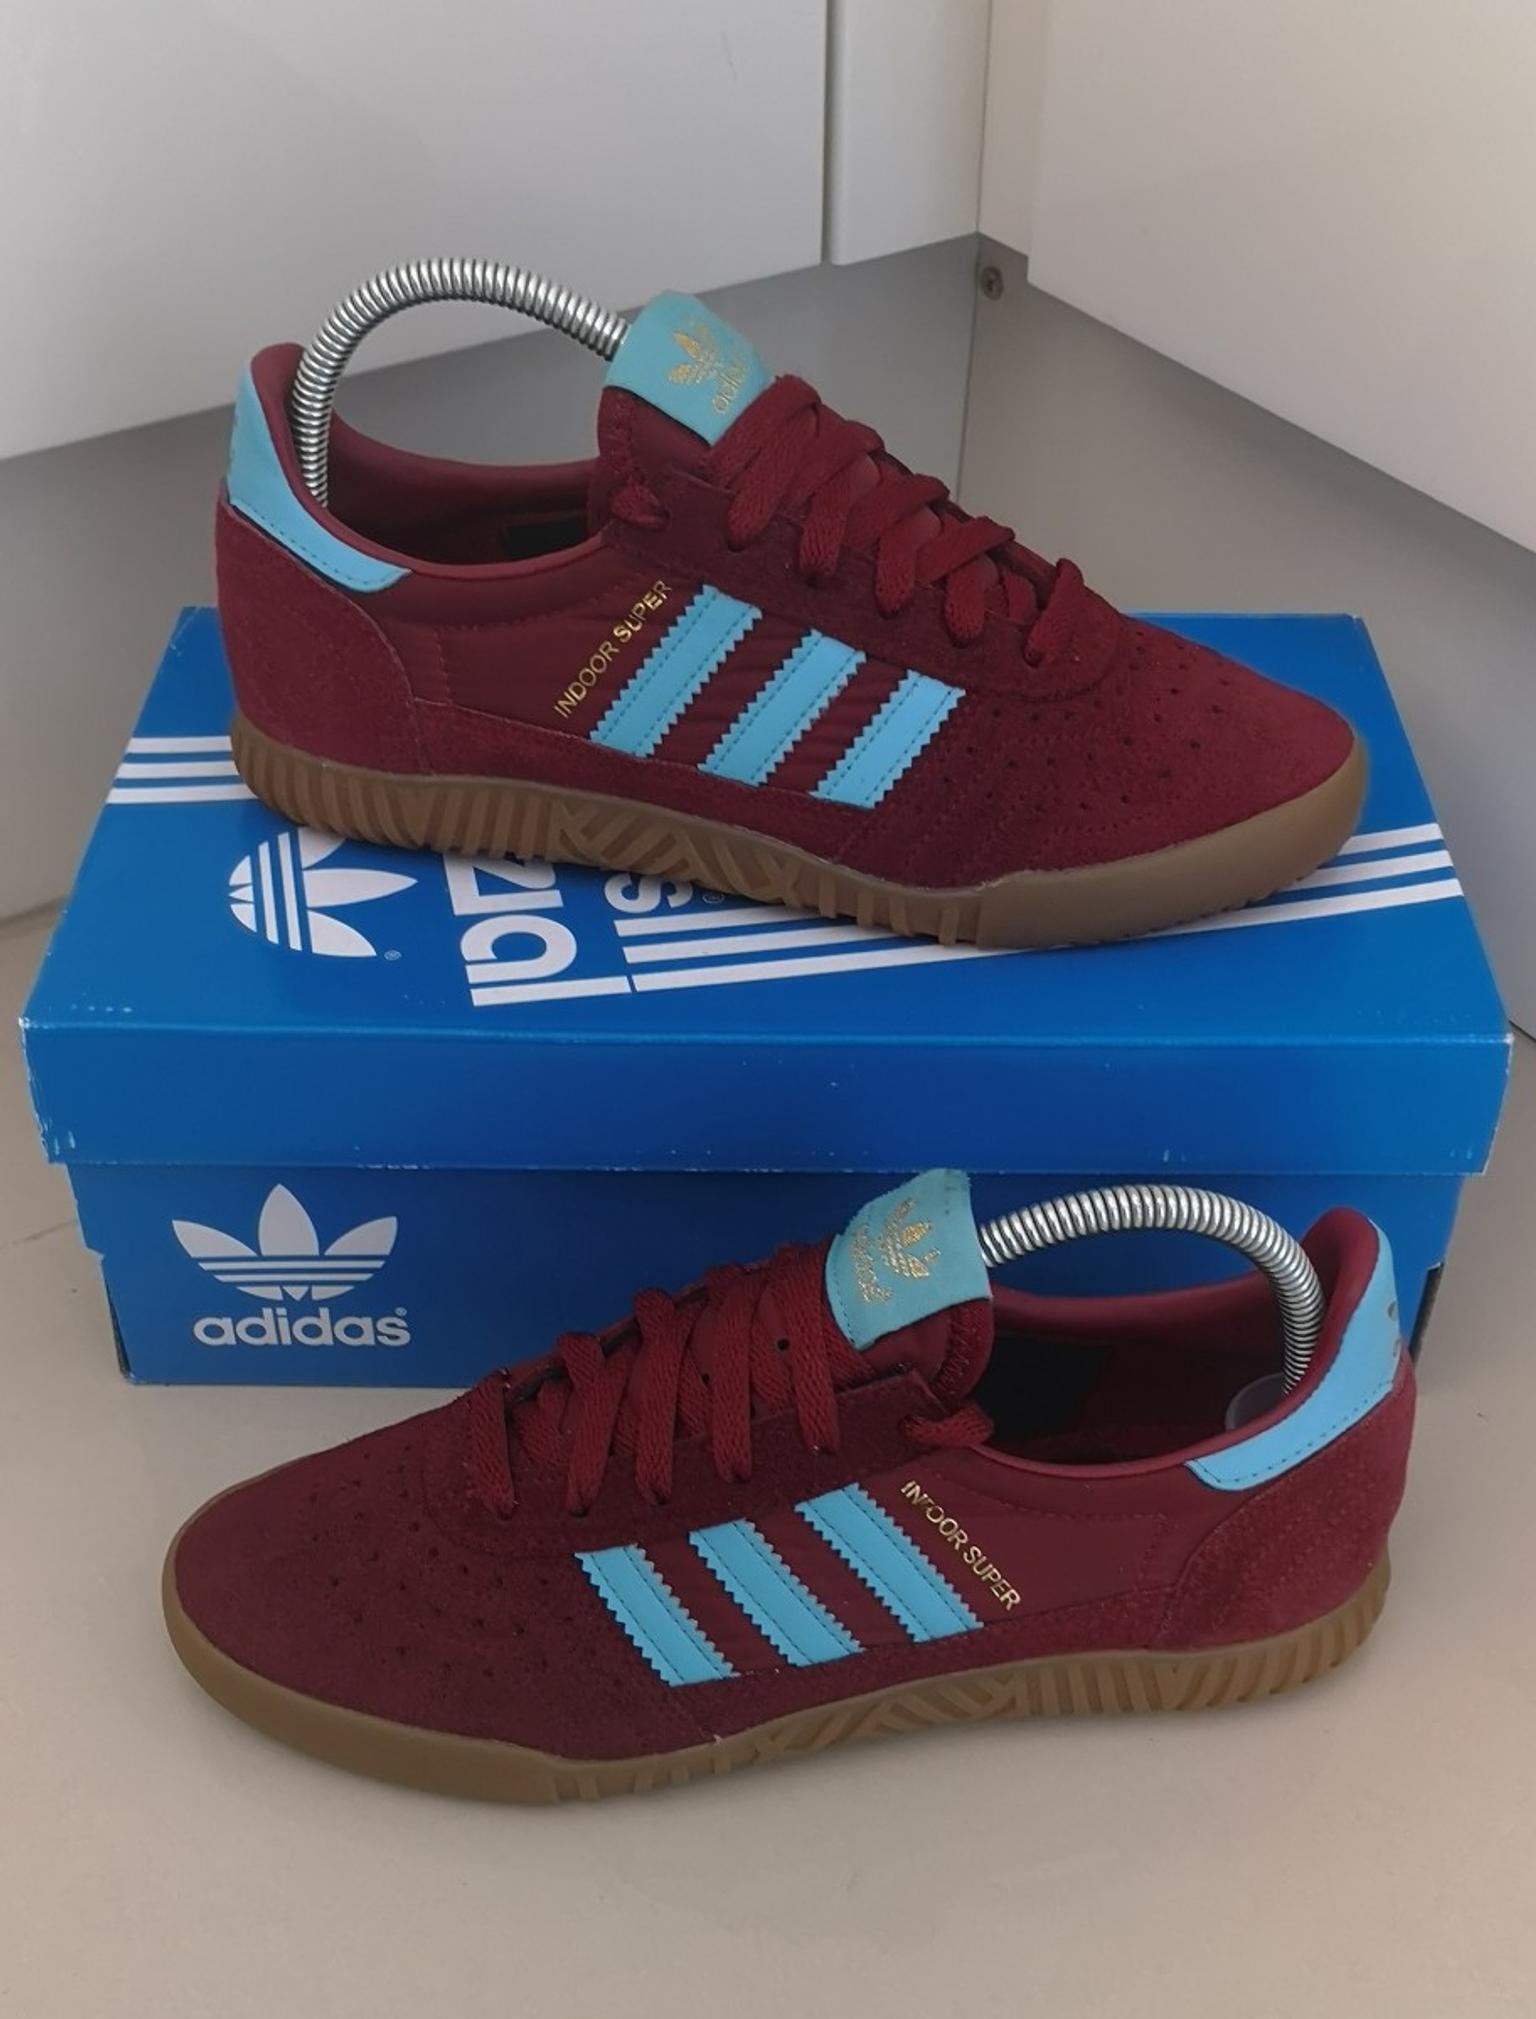 claret and blue adidas trainers